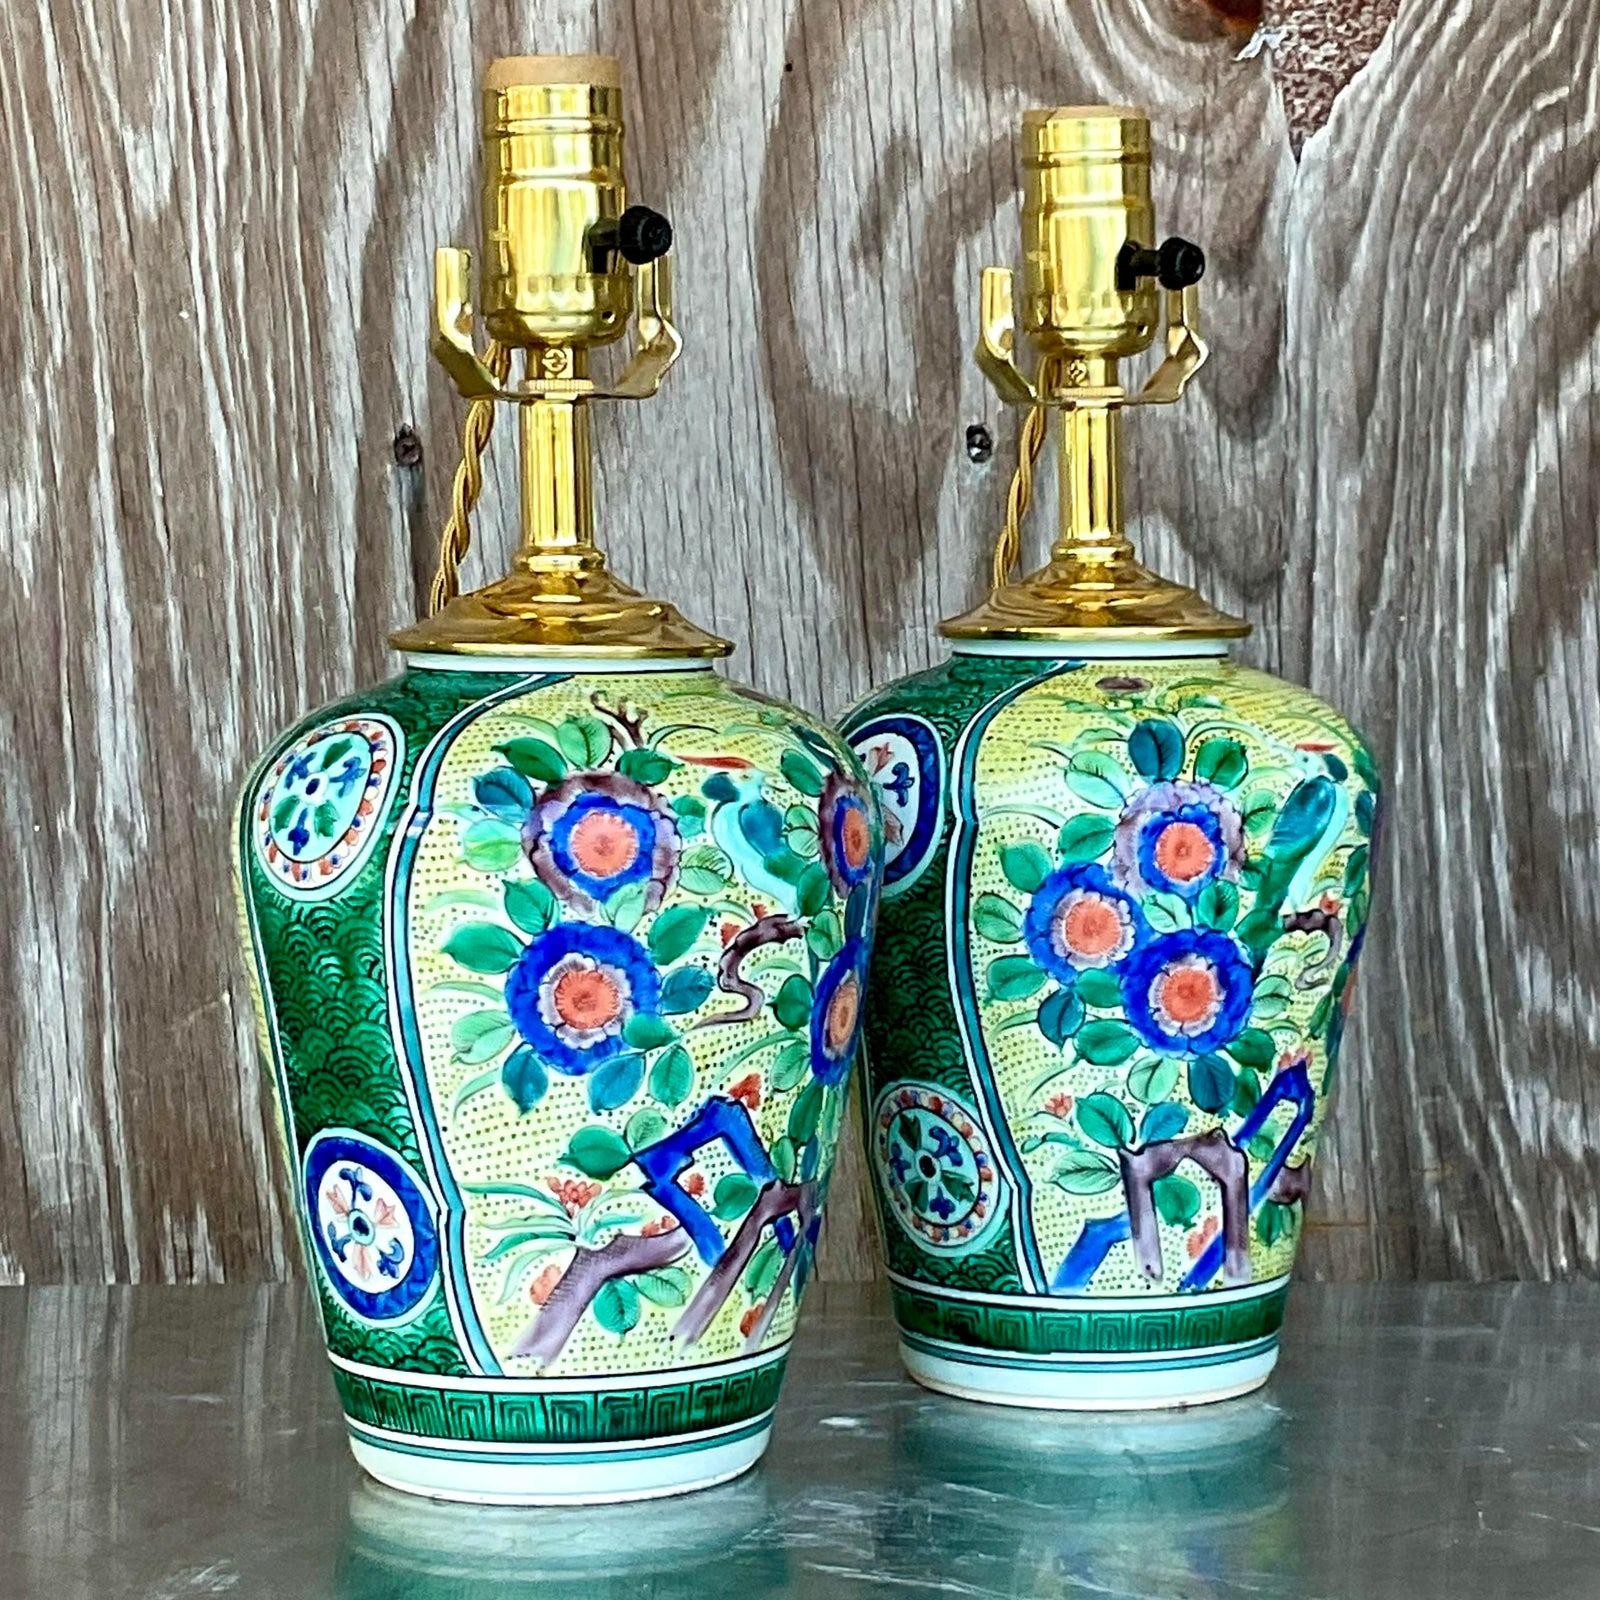 Vintage Asian Glazed Ceramic Floral Table Lamps - a Pair For Sale 4